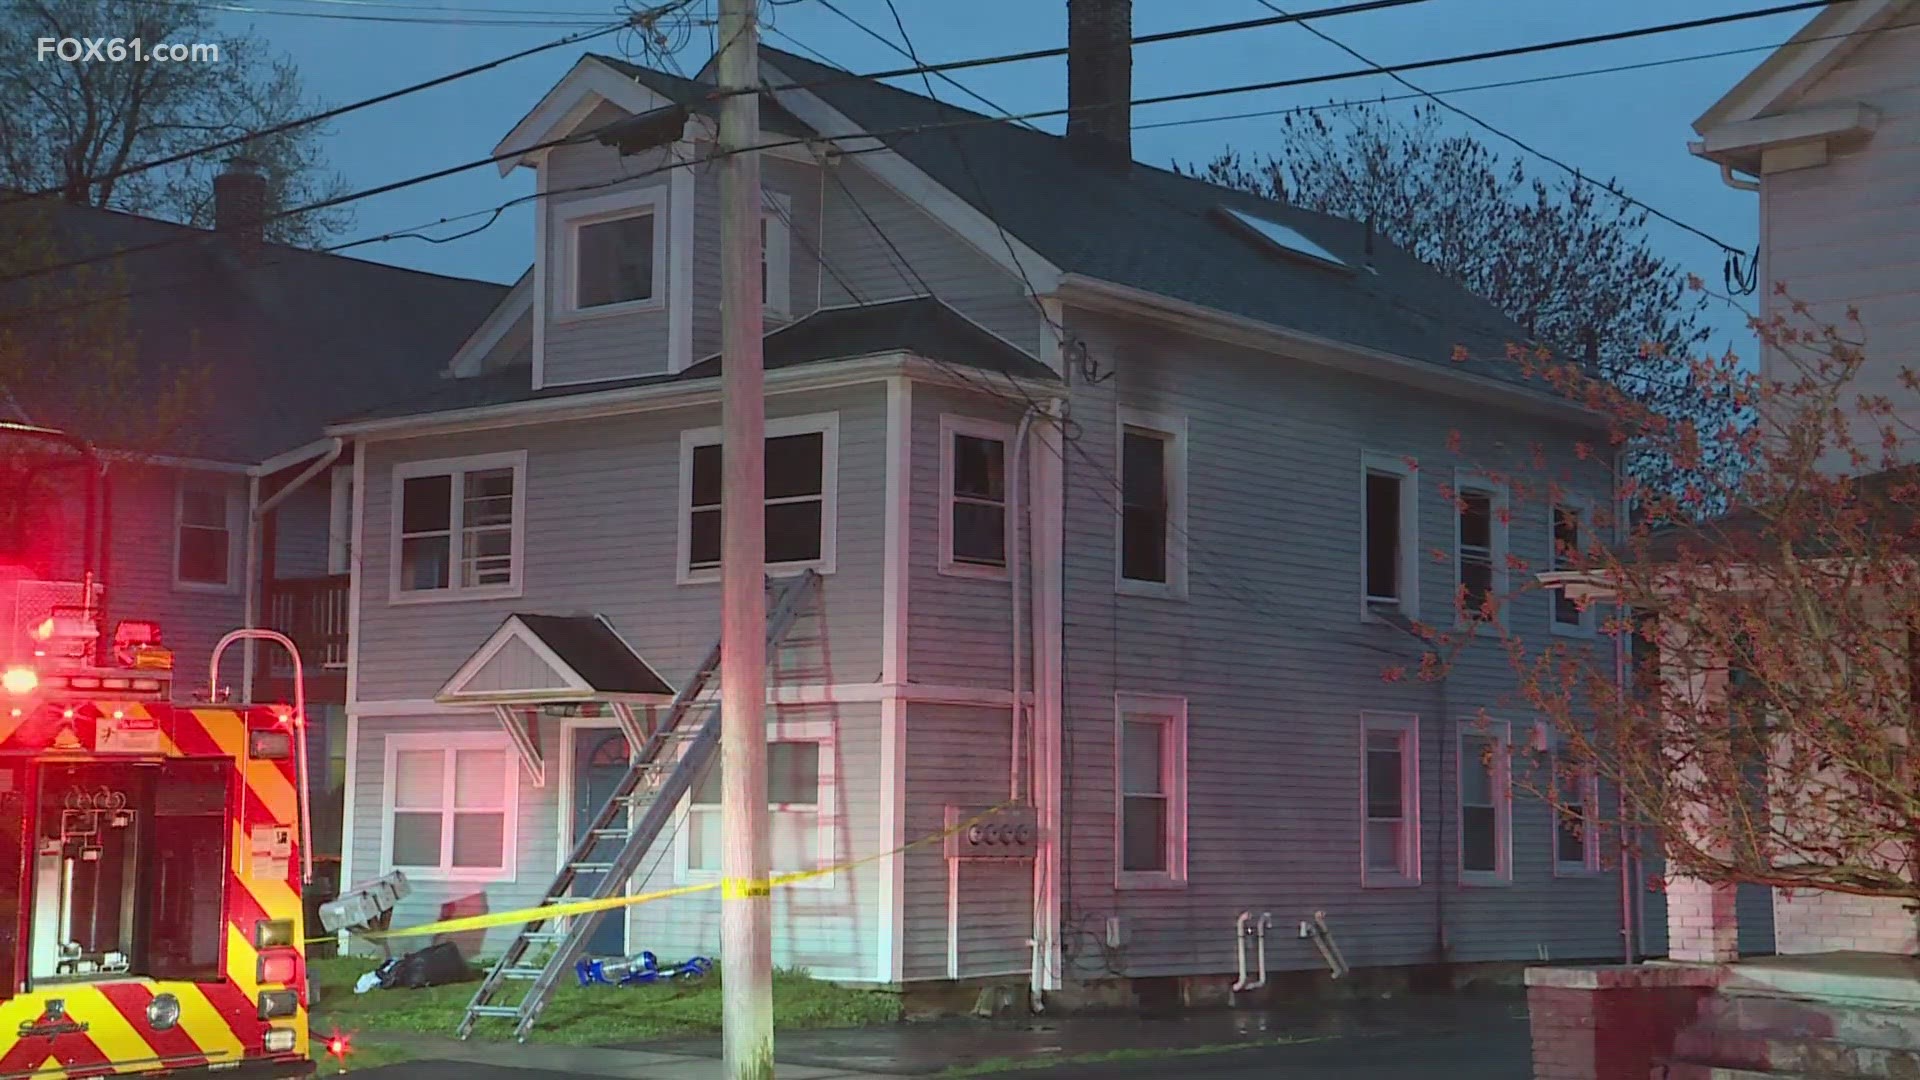 The three victims of a house fire in Wallingford have been identified.